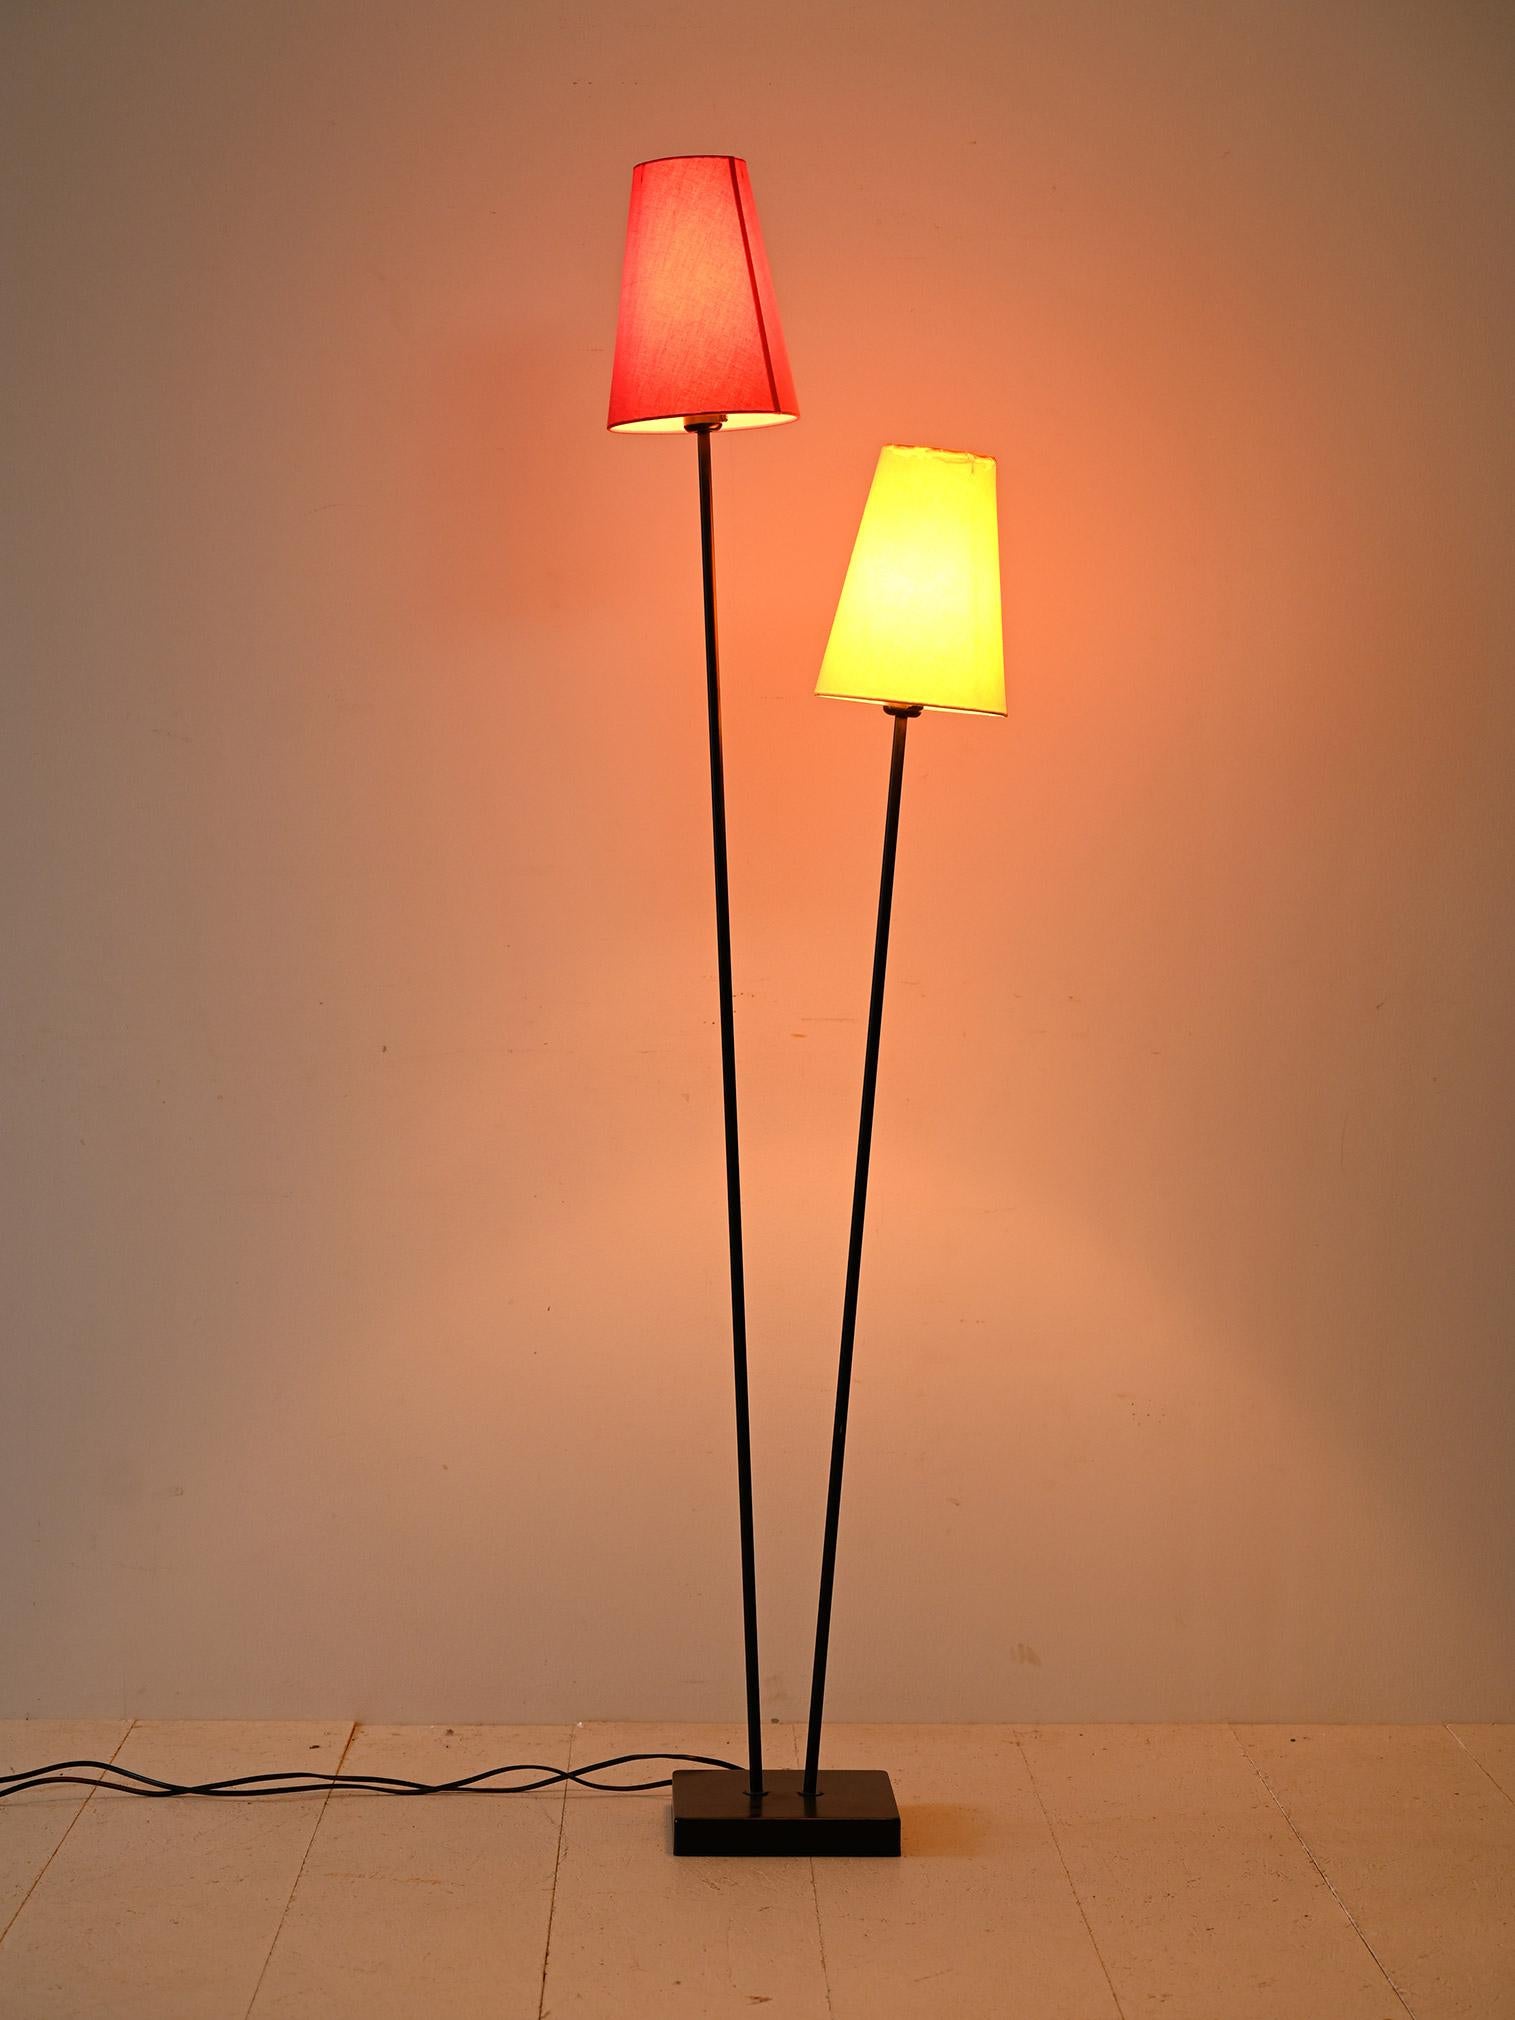 Nordic lamp with double lampshade.

This charming vintage lamp is distinguished by its black metal frame, which adds a modern touch to its Nordic design. The two fabric lampshades, one red and the other yellow, provide a lively and colorful accent,